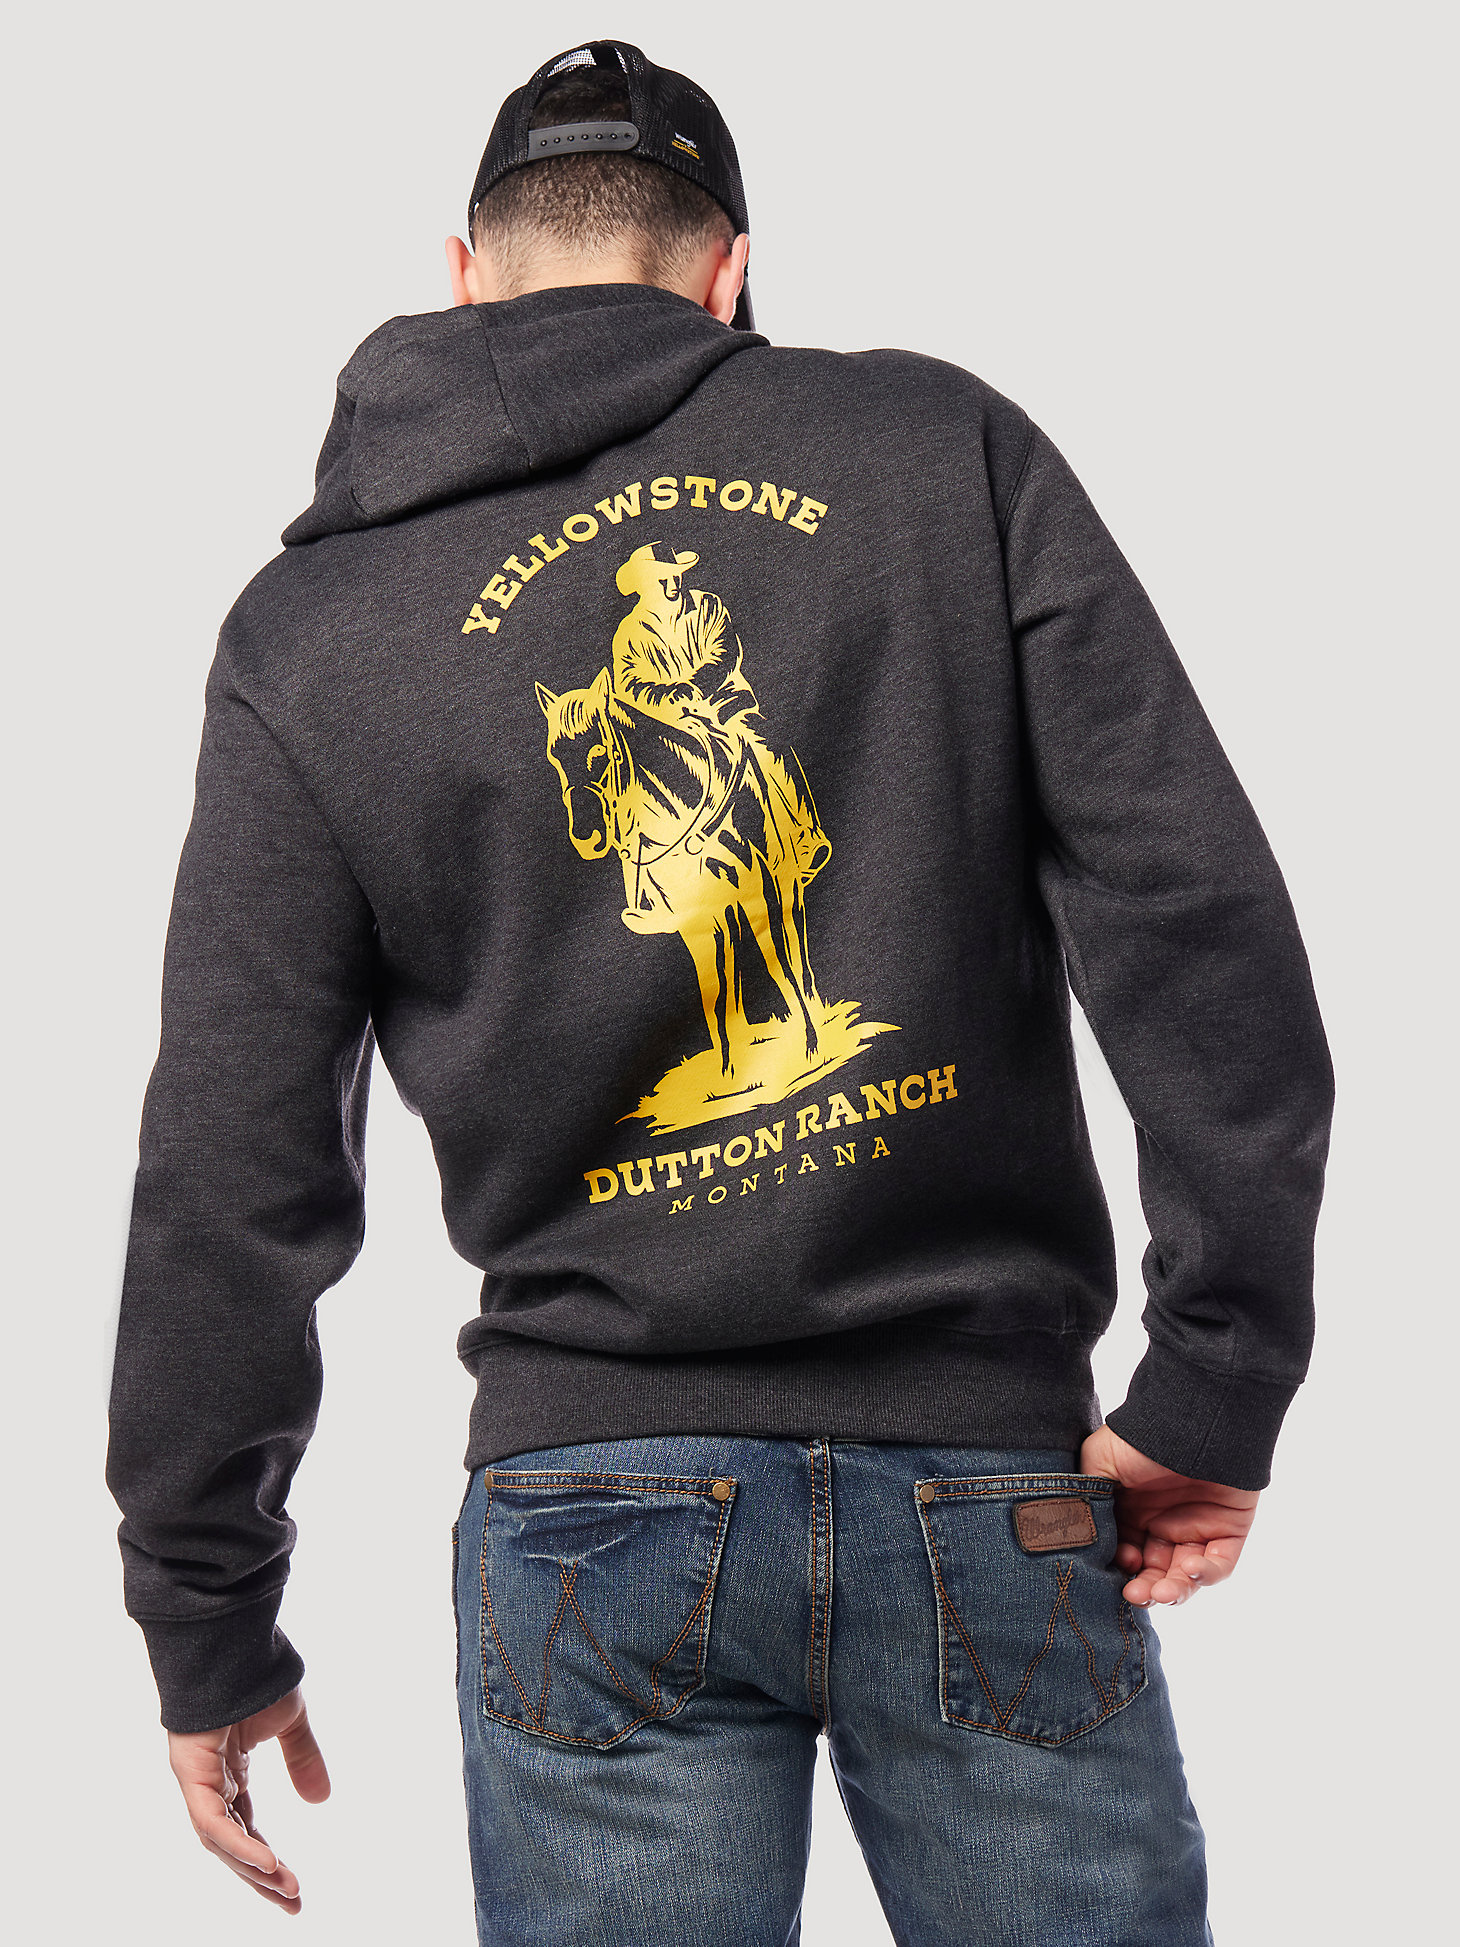 Wrangler x Yellowstone Dutton Ranch Hoodie in Charcoal Heather alternative view 1